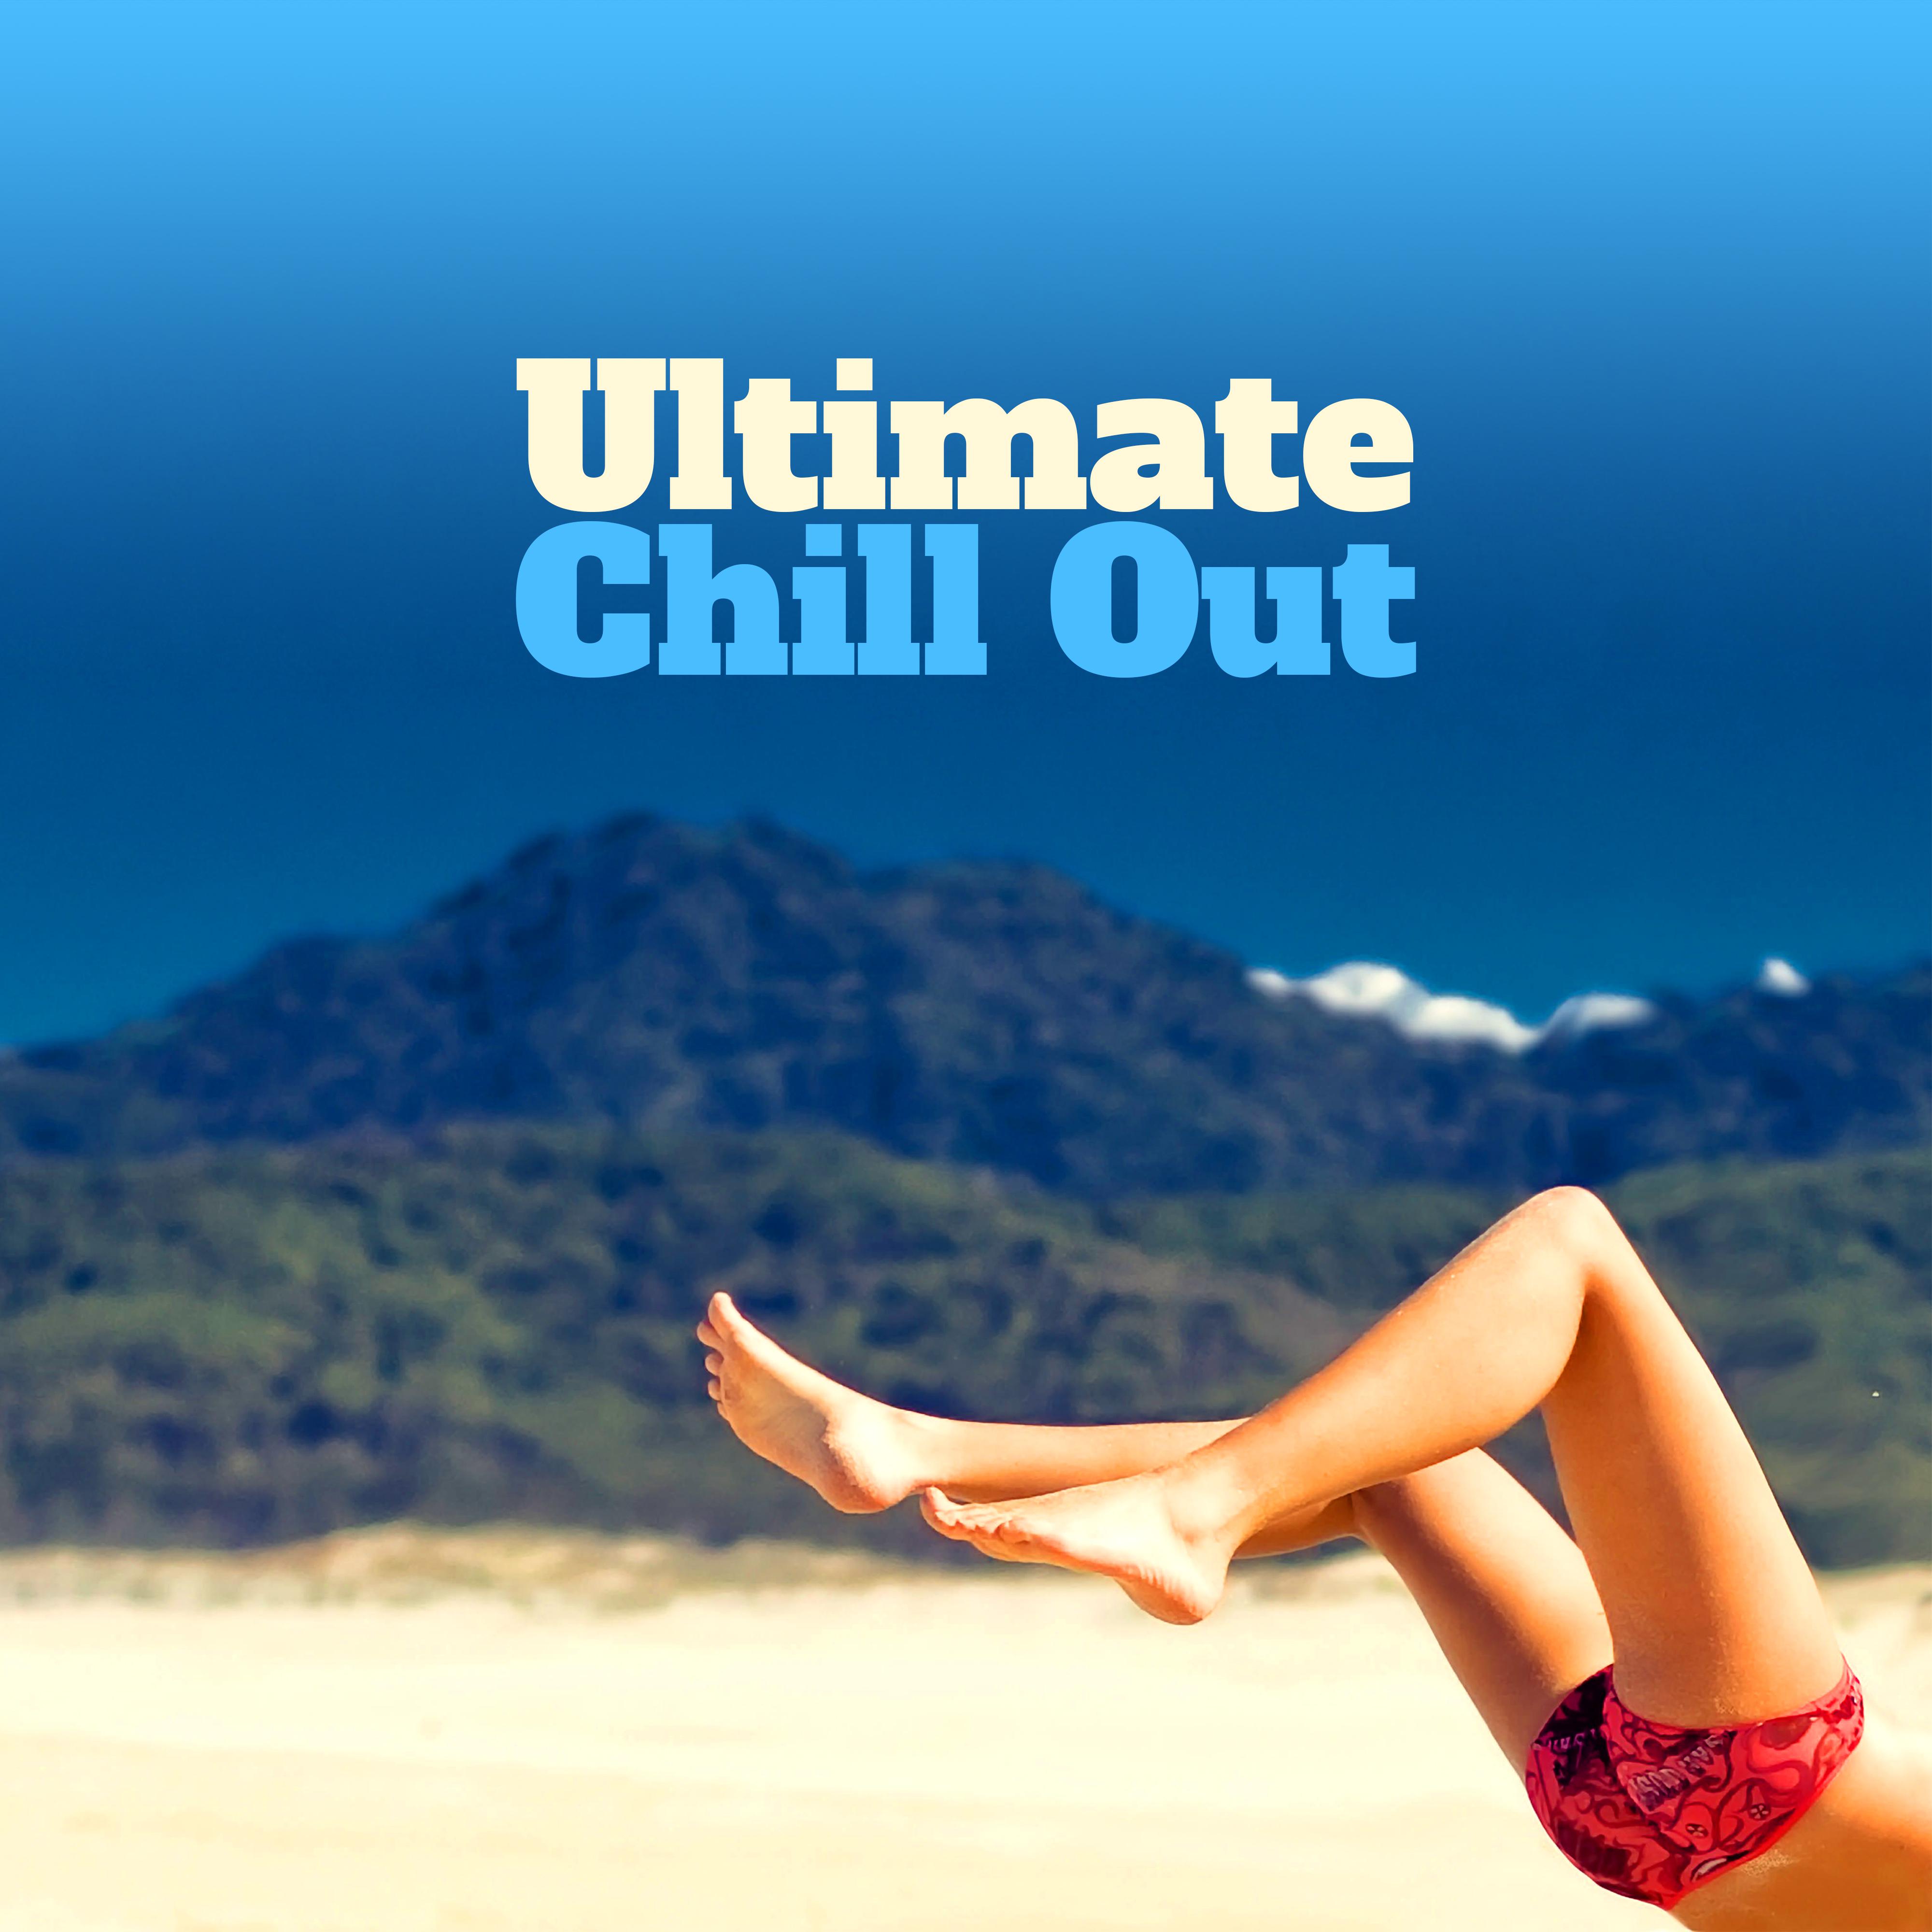 Ultimate Chill Out - Summer Music, Chill Out 2017, Lounge, Electronic Beats, Positive Vibes